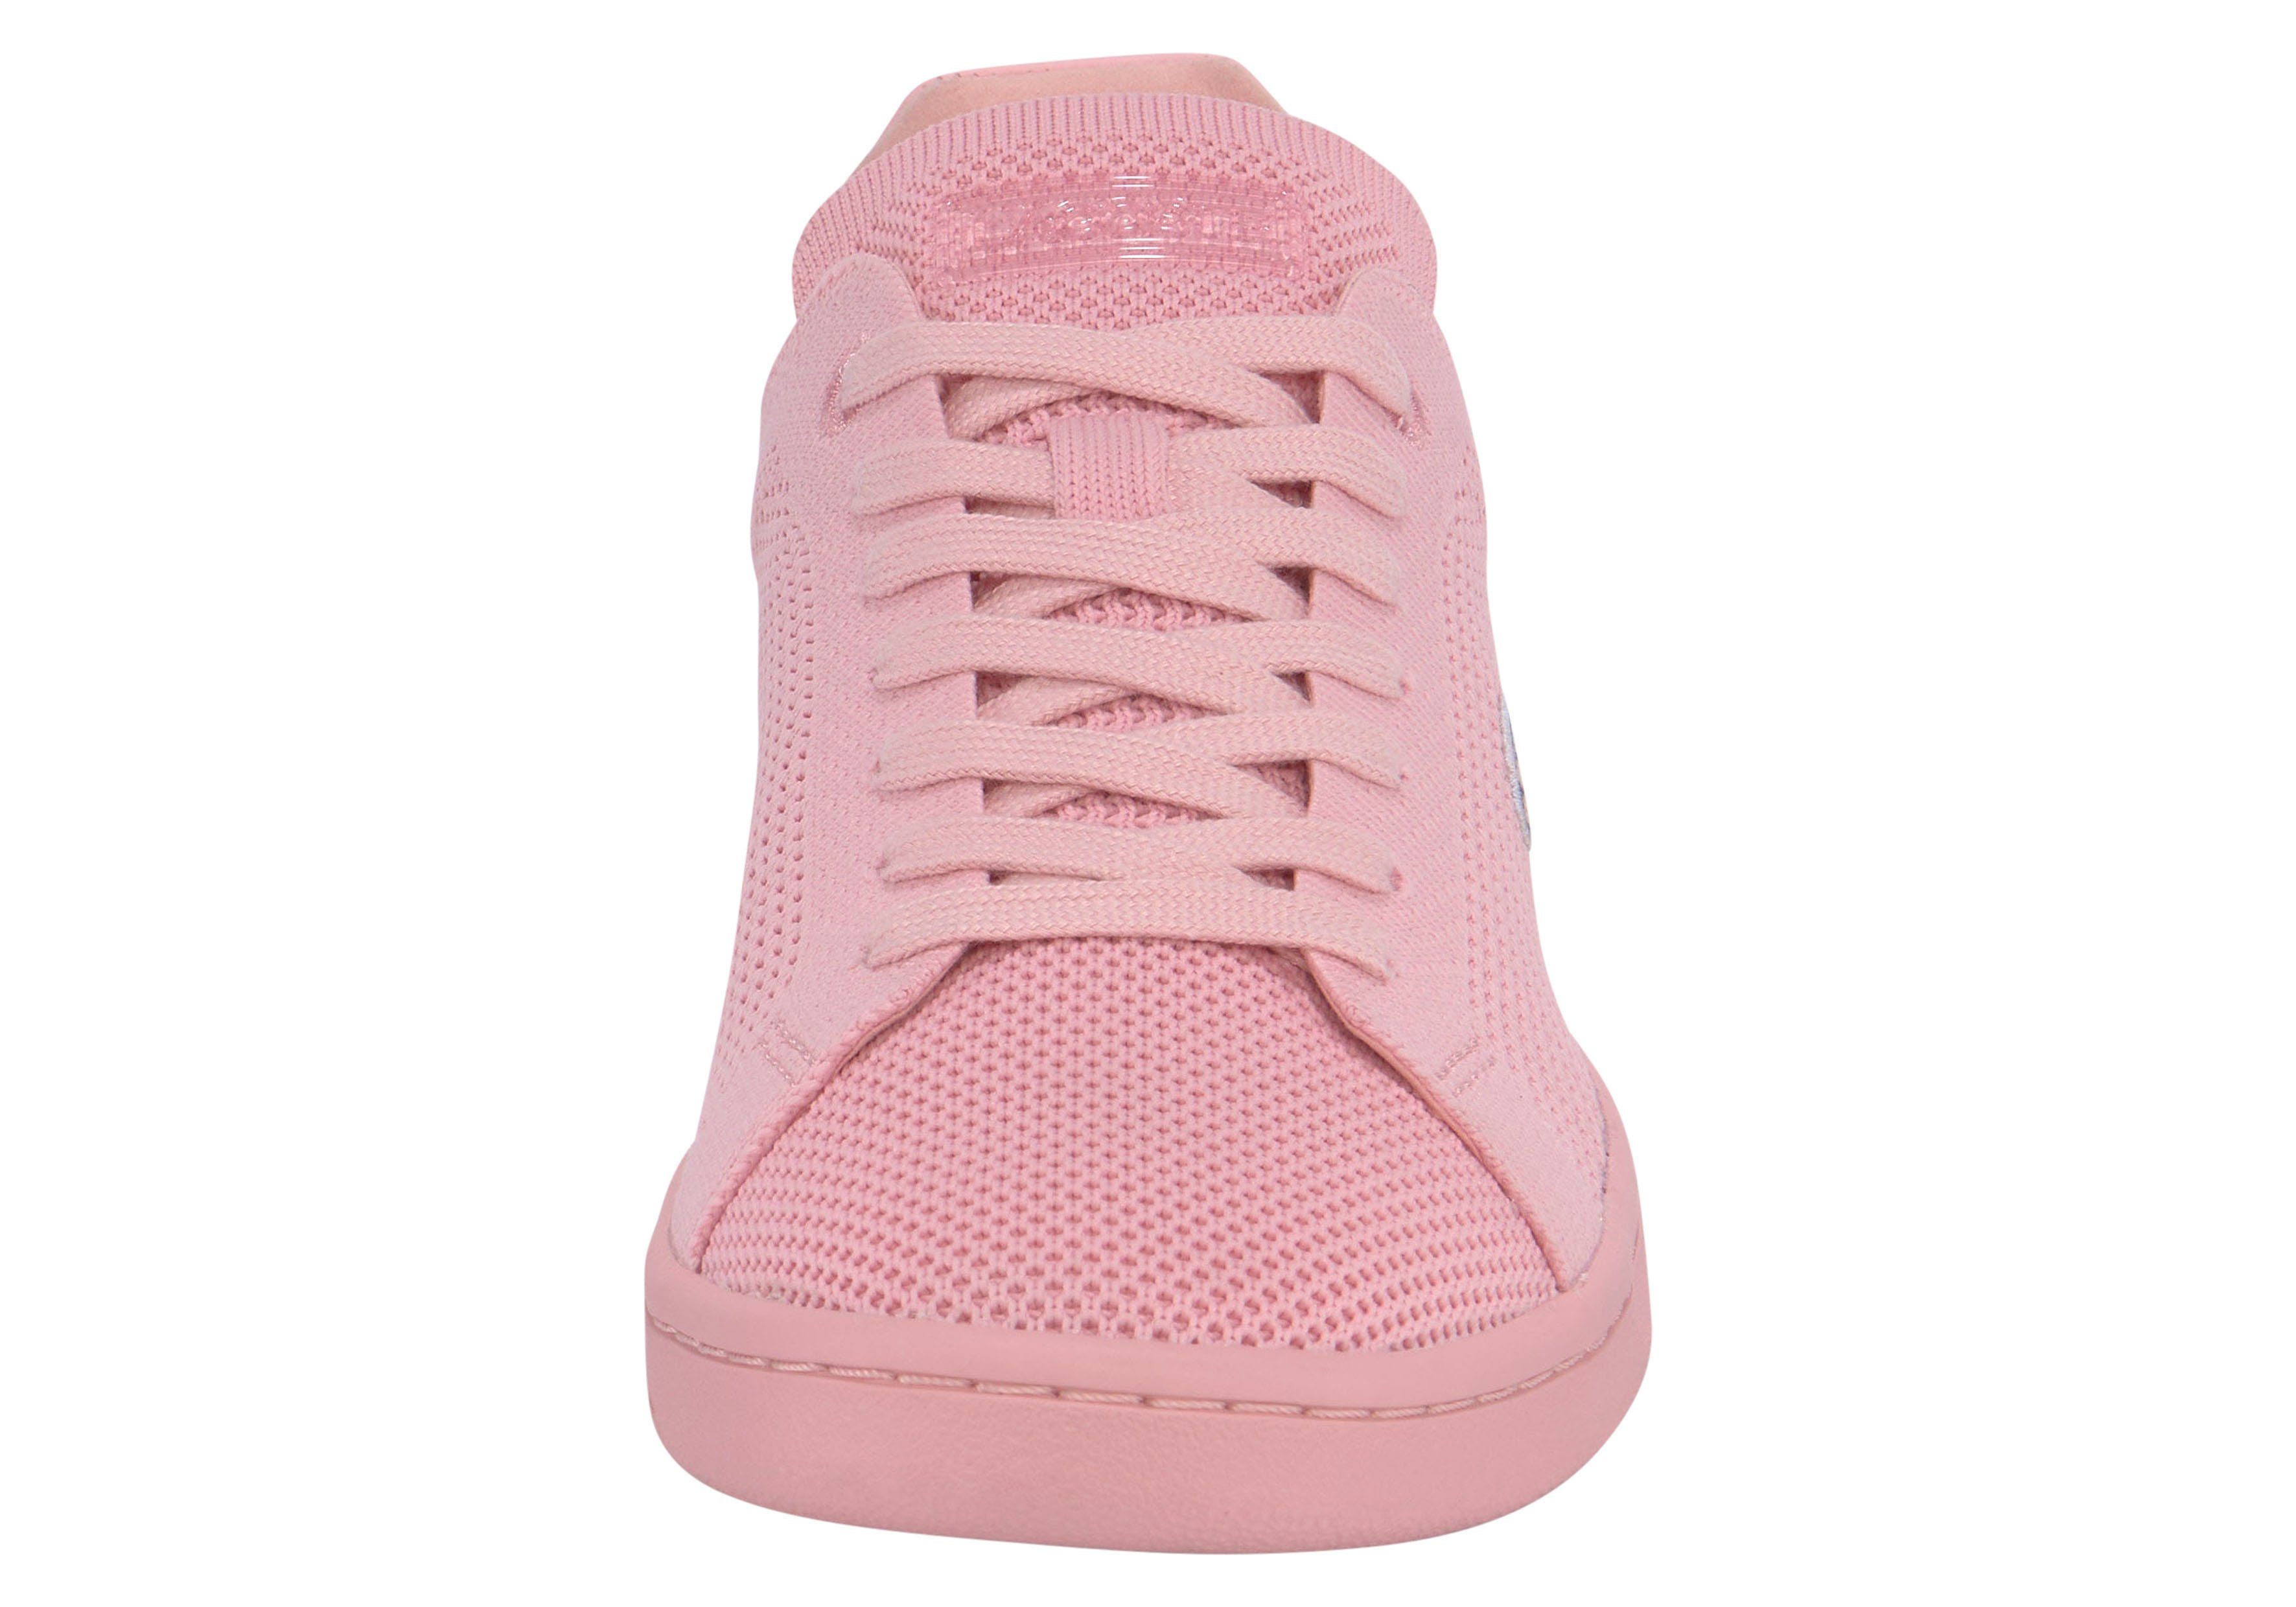 Lacoste CARNABY PIQUEE 123 SFA Sneaker 1 pink